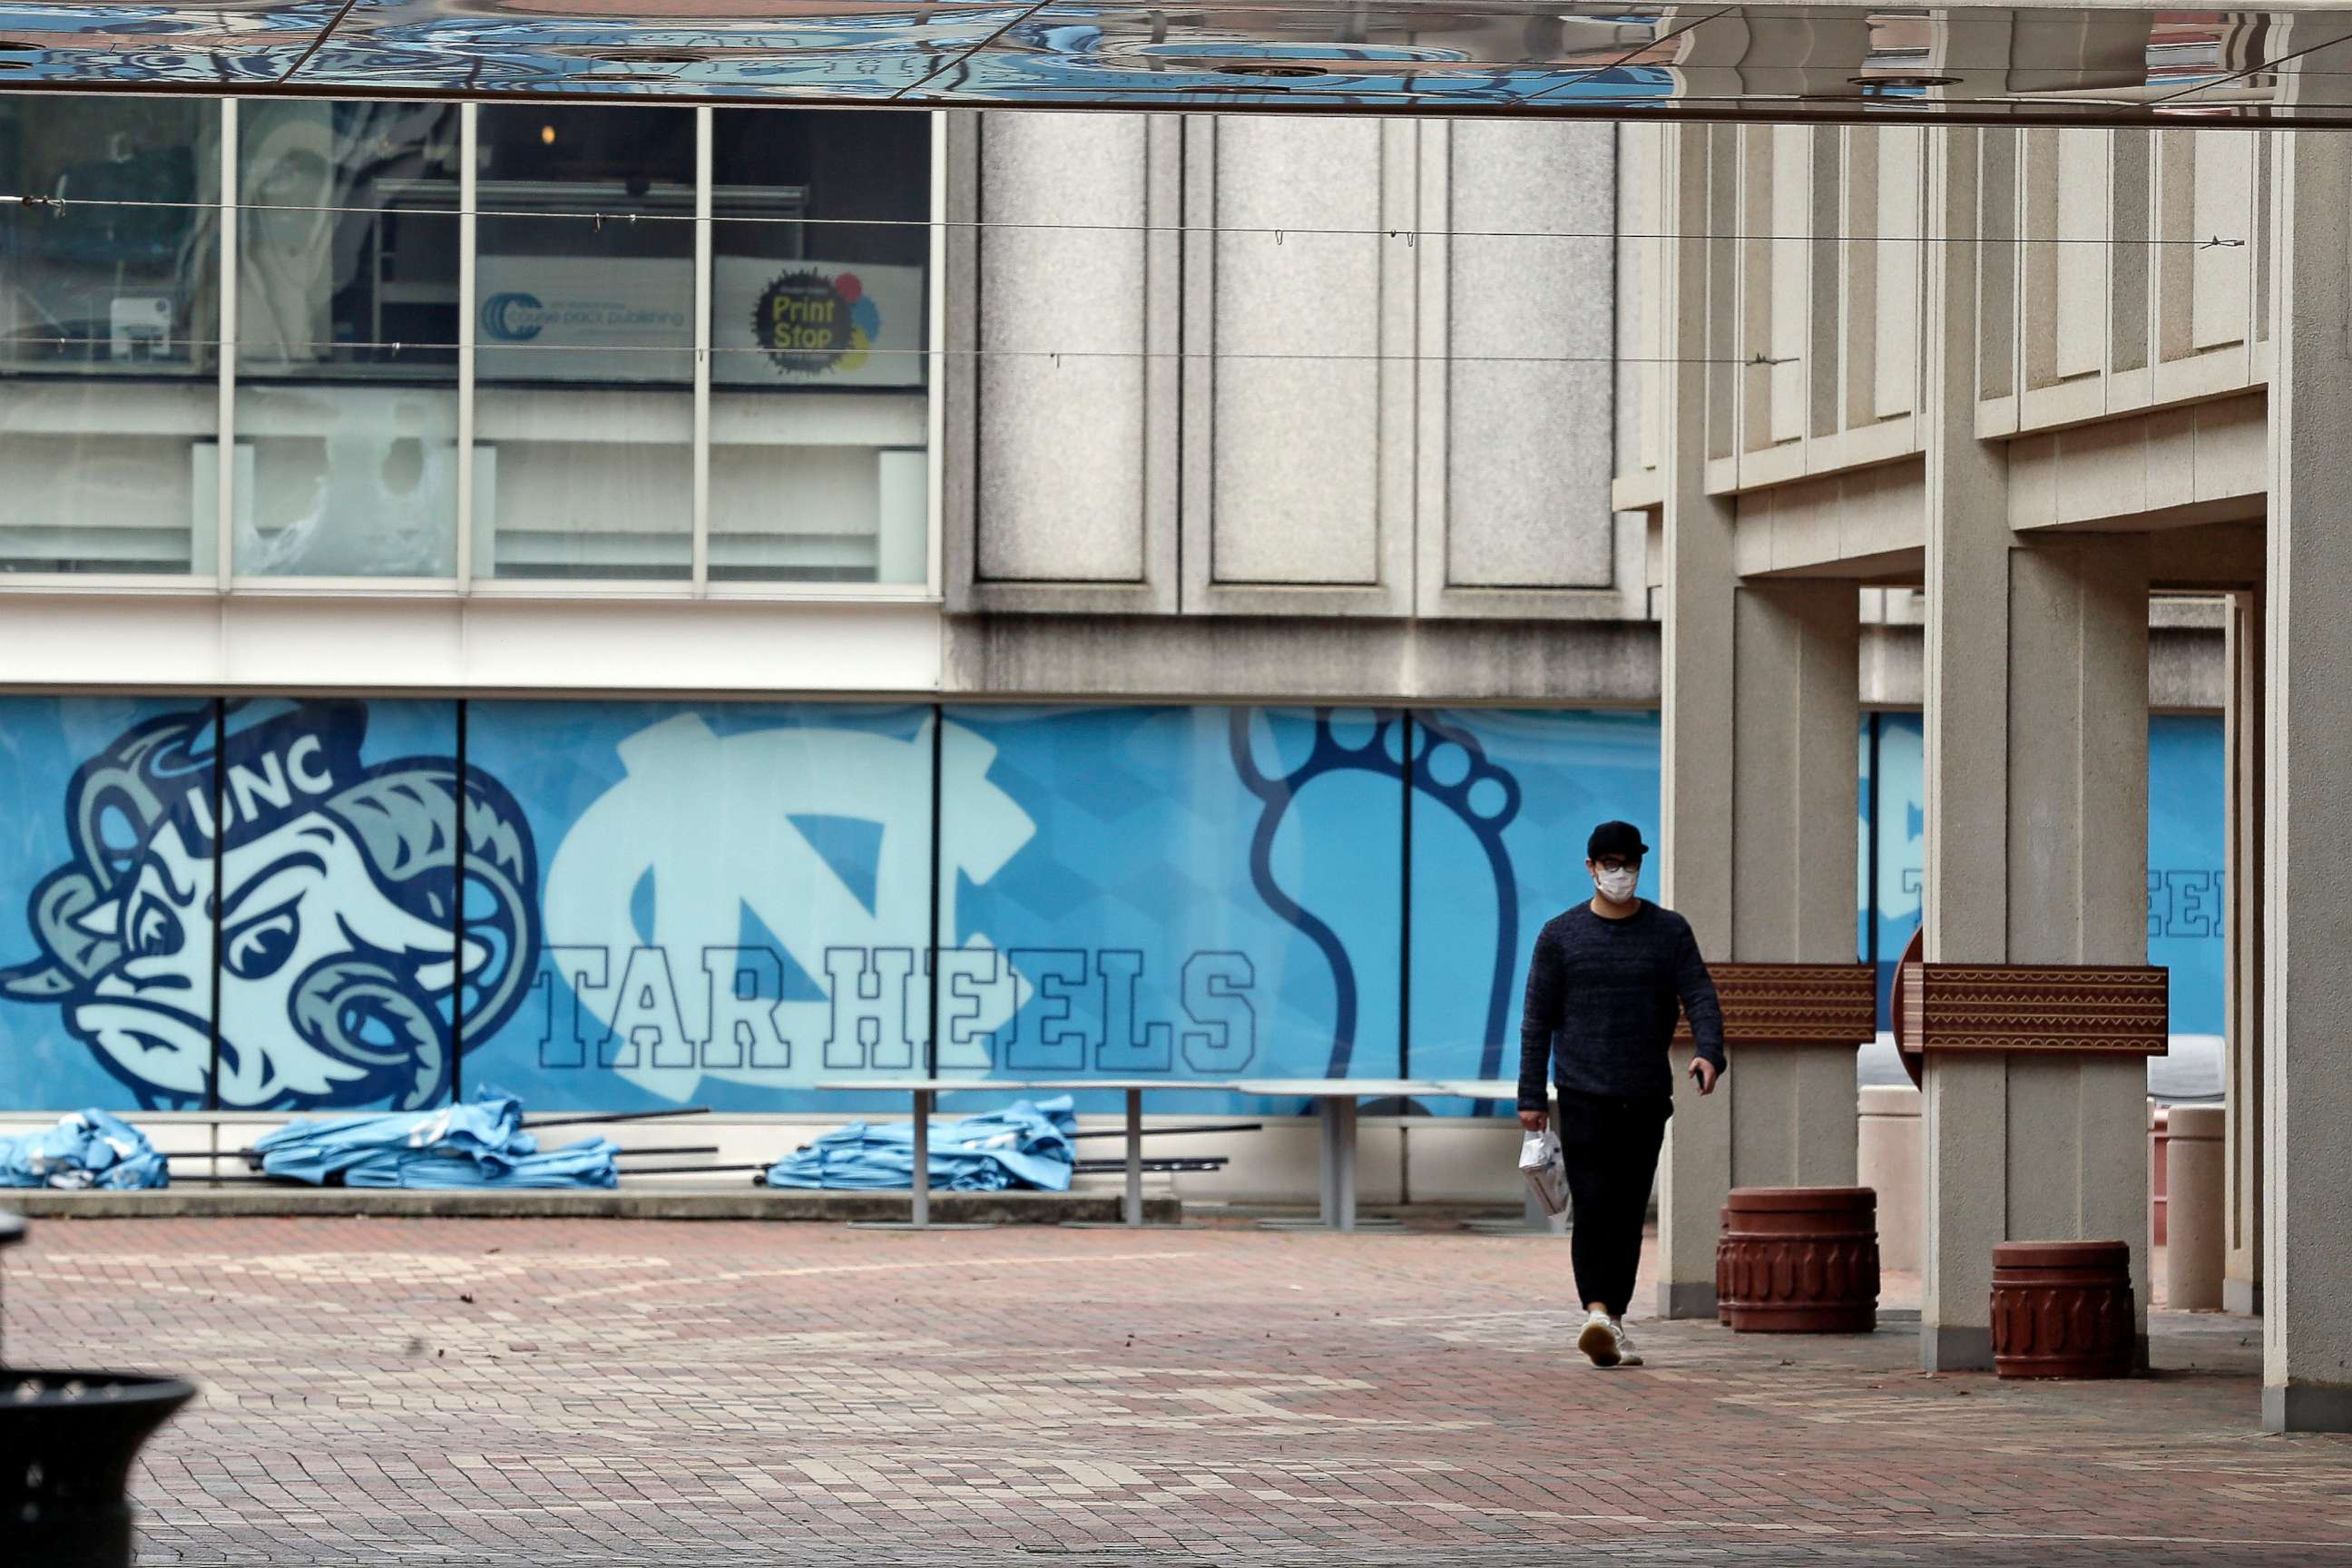 PHOTO: In this March 18, 2020 file photo, a pedestrian walks through campus at the University of North Carolina in Chapel Hill, N.C.